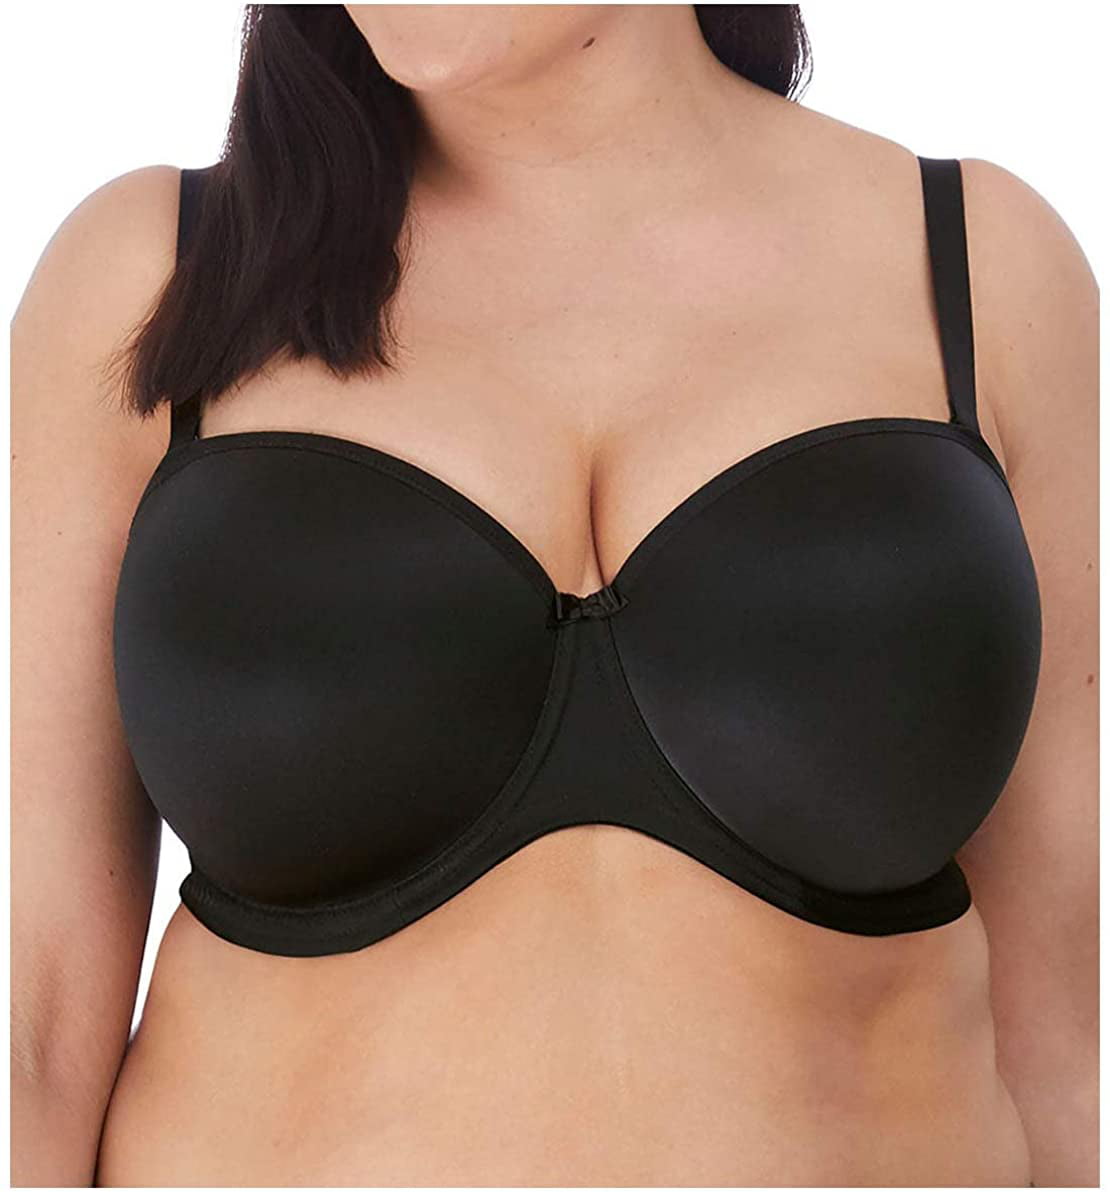 Elomi Smoothing Underwire Foam Molded Strapless Bra, Black, 38F - Discount  Scrubs and Fashion